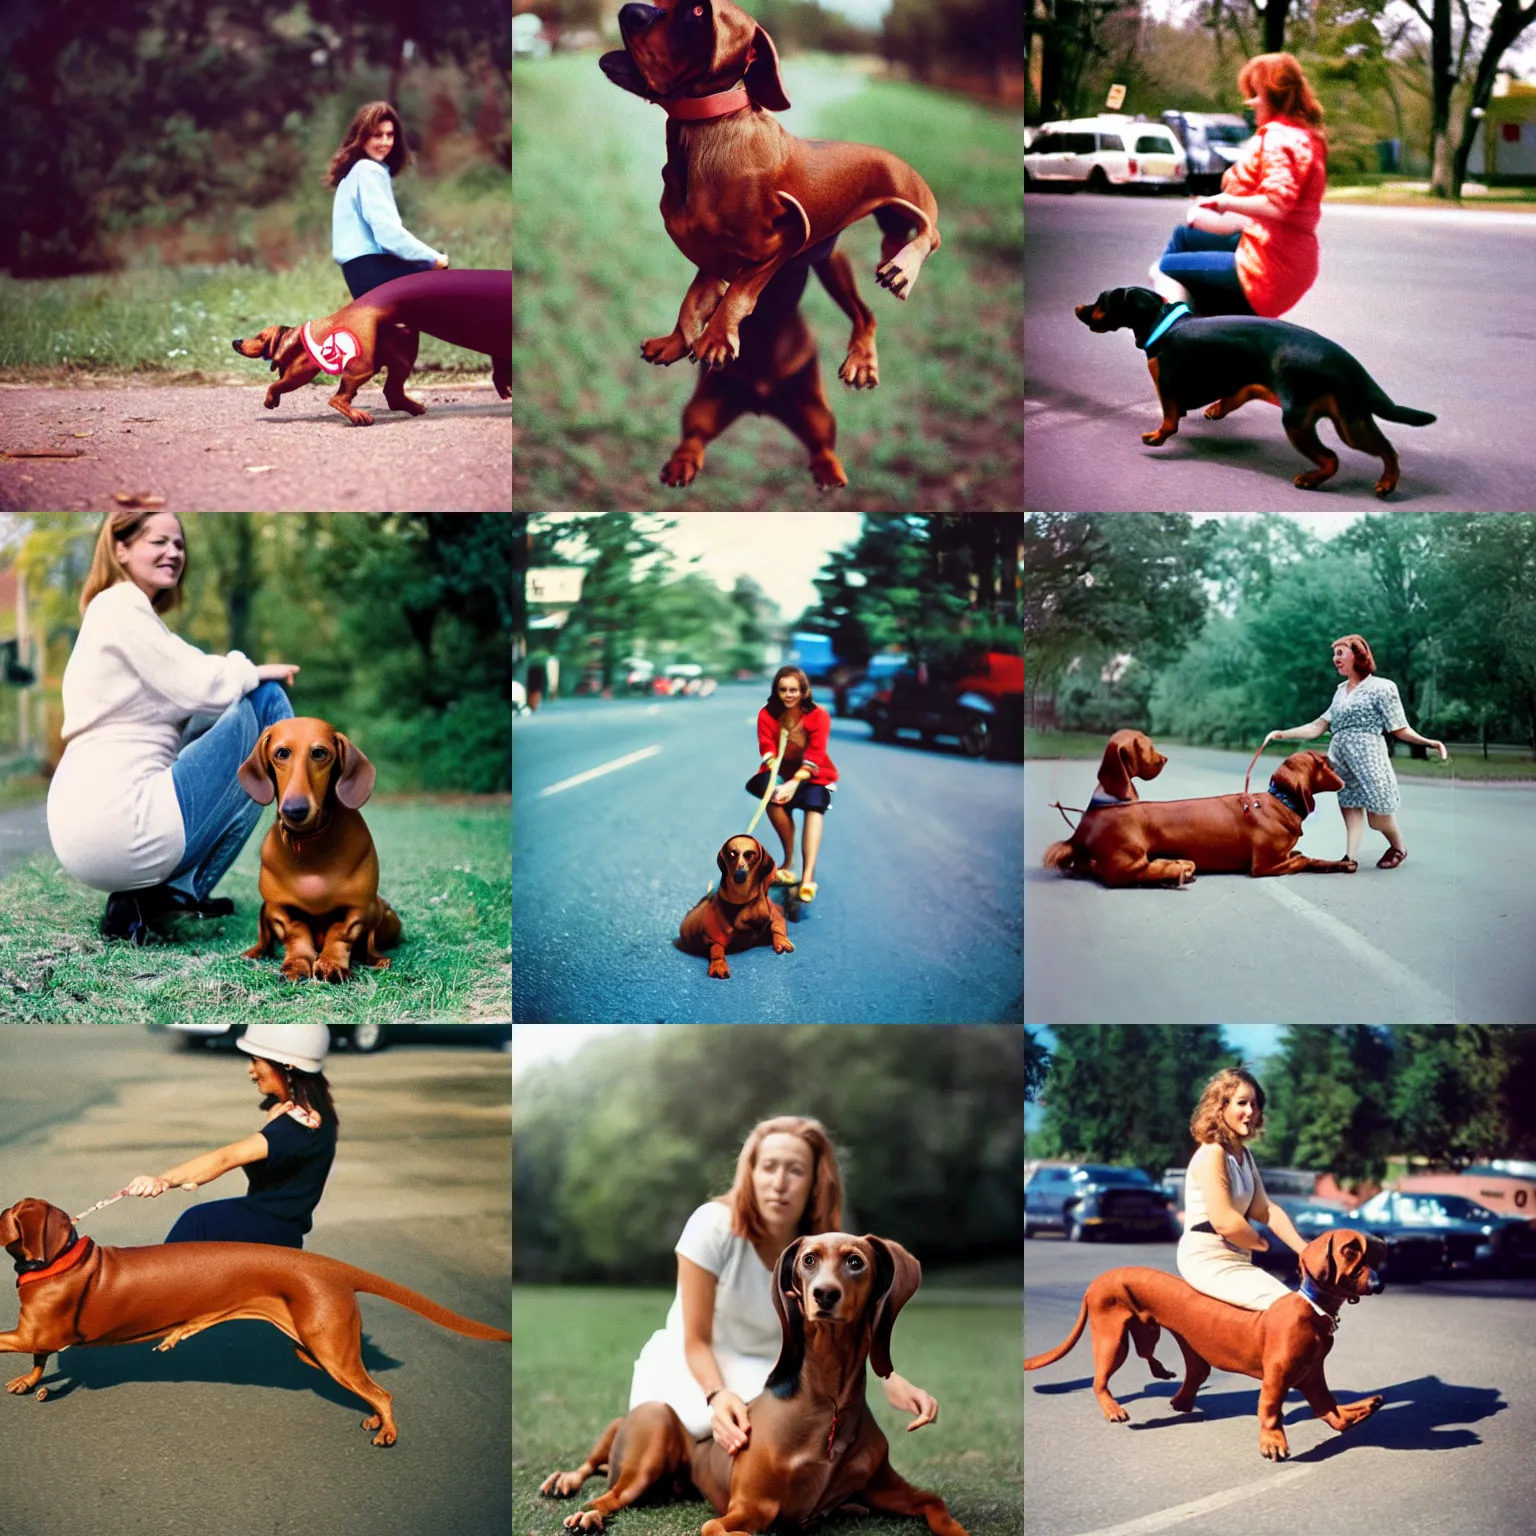 Prompt: nostalgic cinestill of a woman riding on a giant dachshund